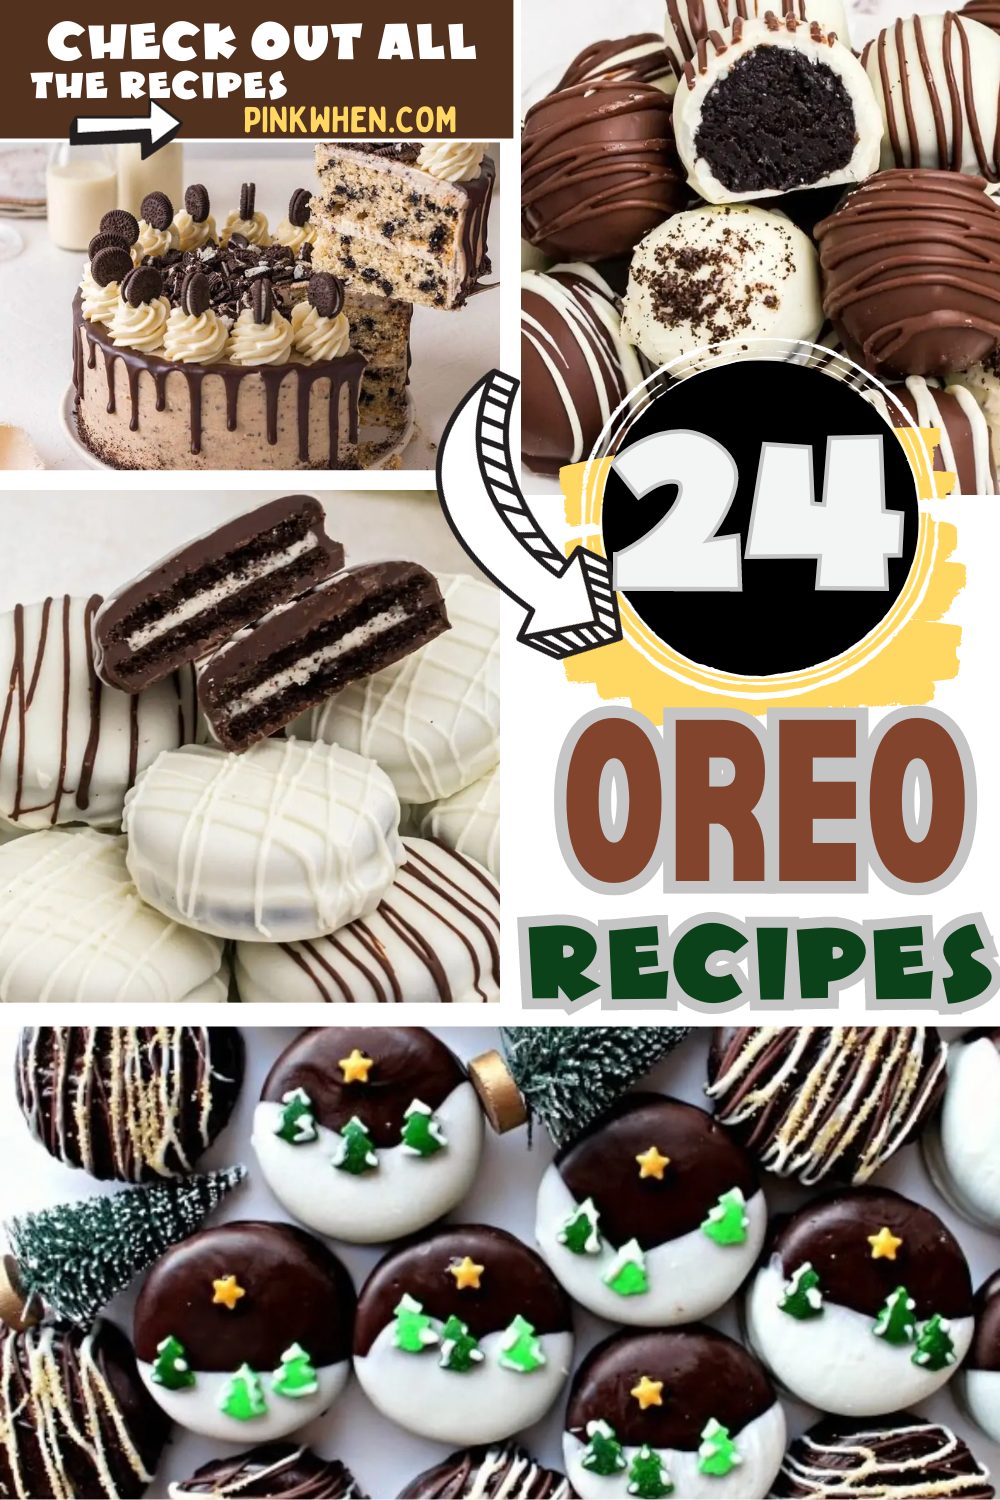 25 Oreo Recipes to Satisfy Your Sweet Tooth